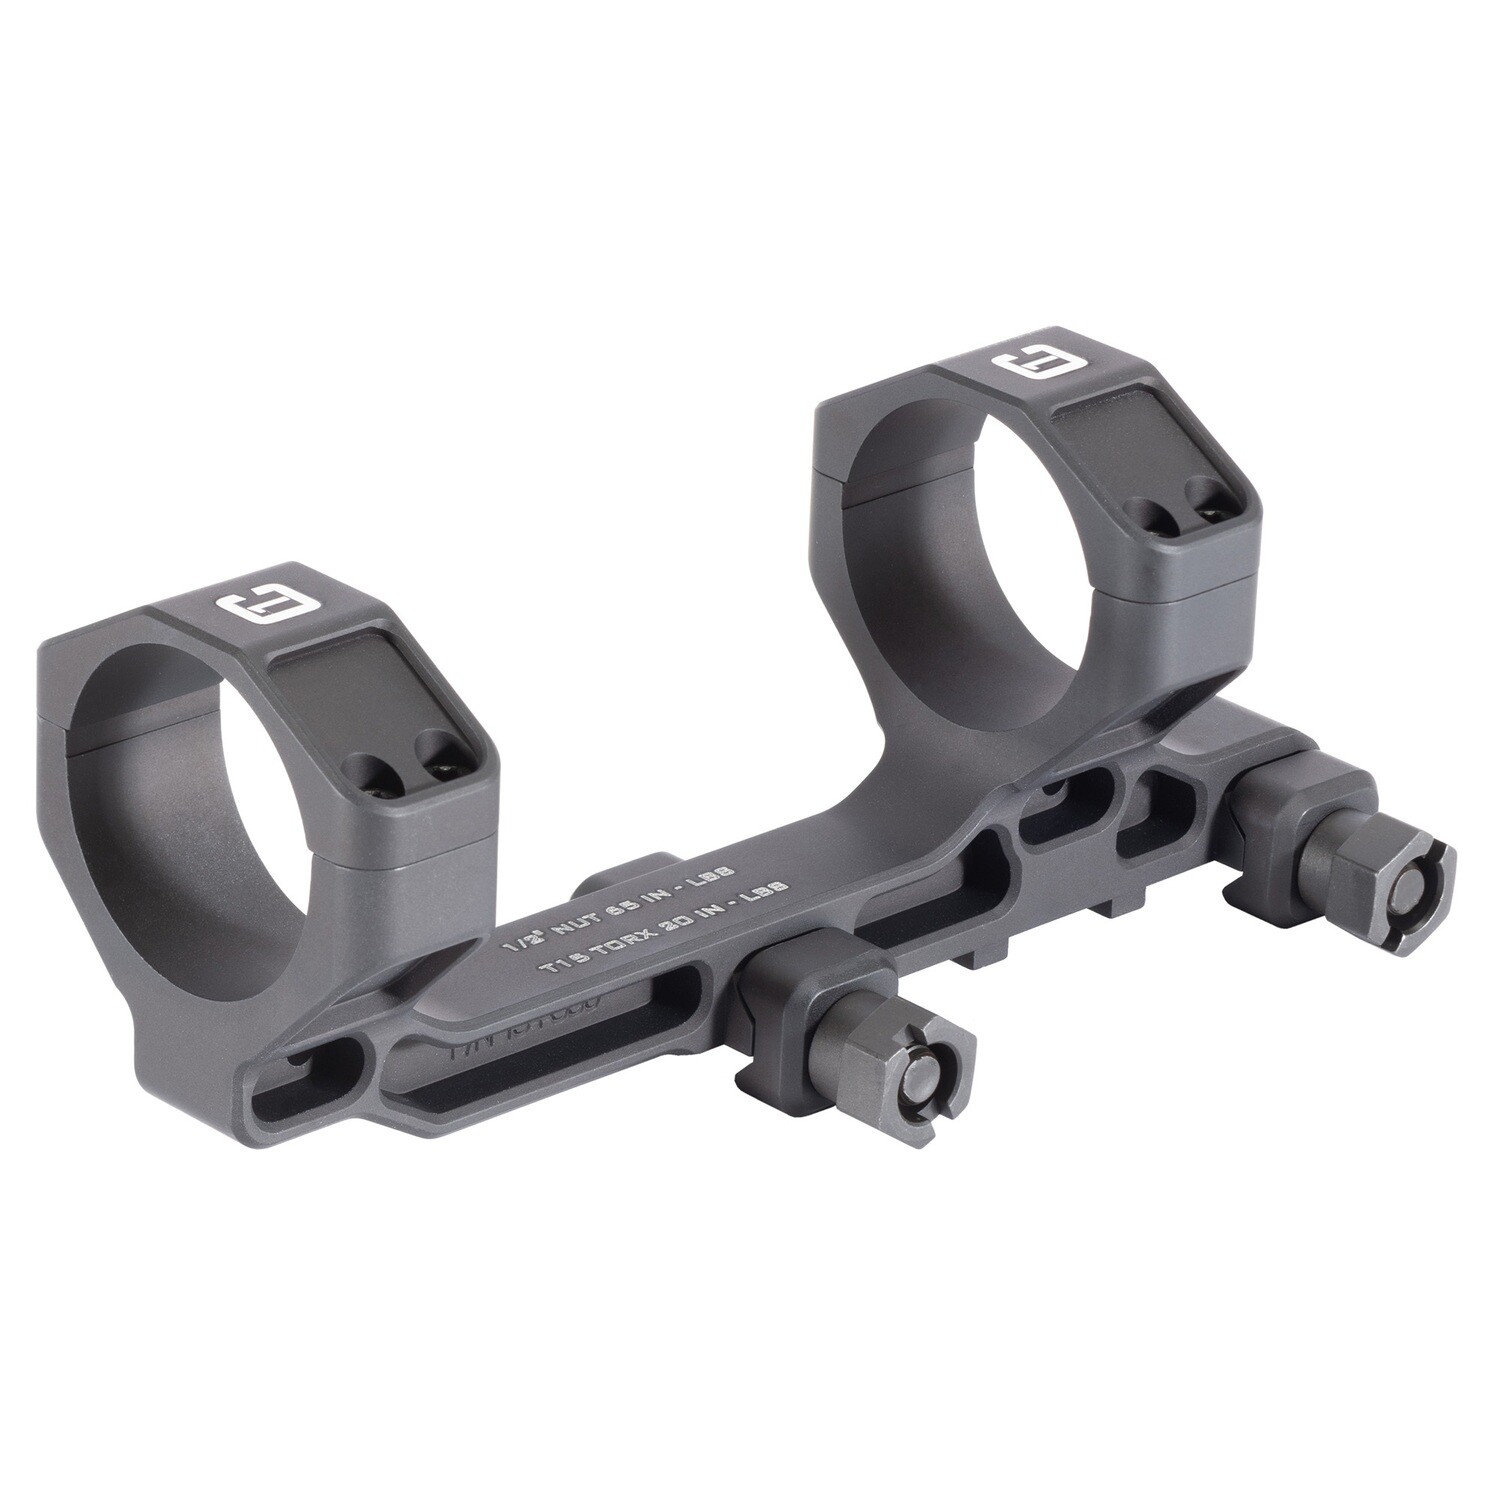 Badger Ordnance Condition One (C1) Modular Mount, Night Vision Height (1.54")